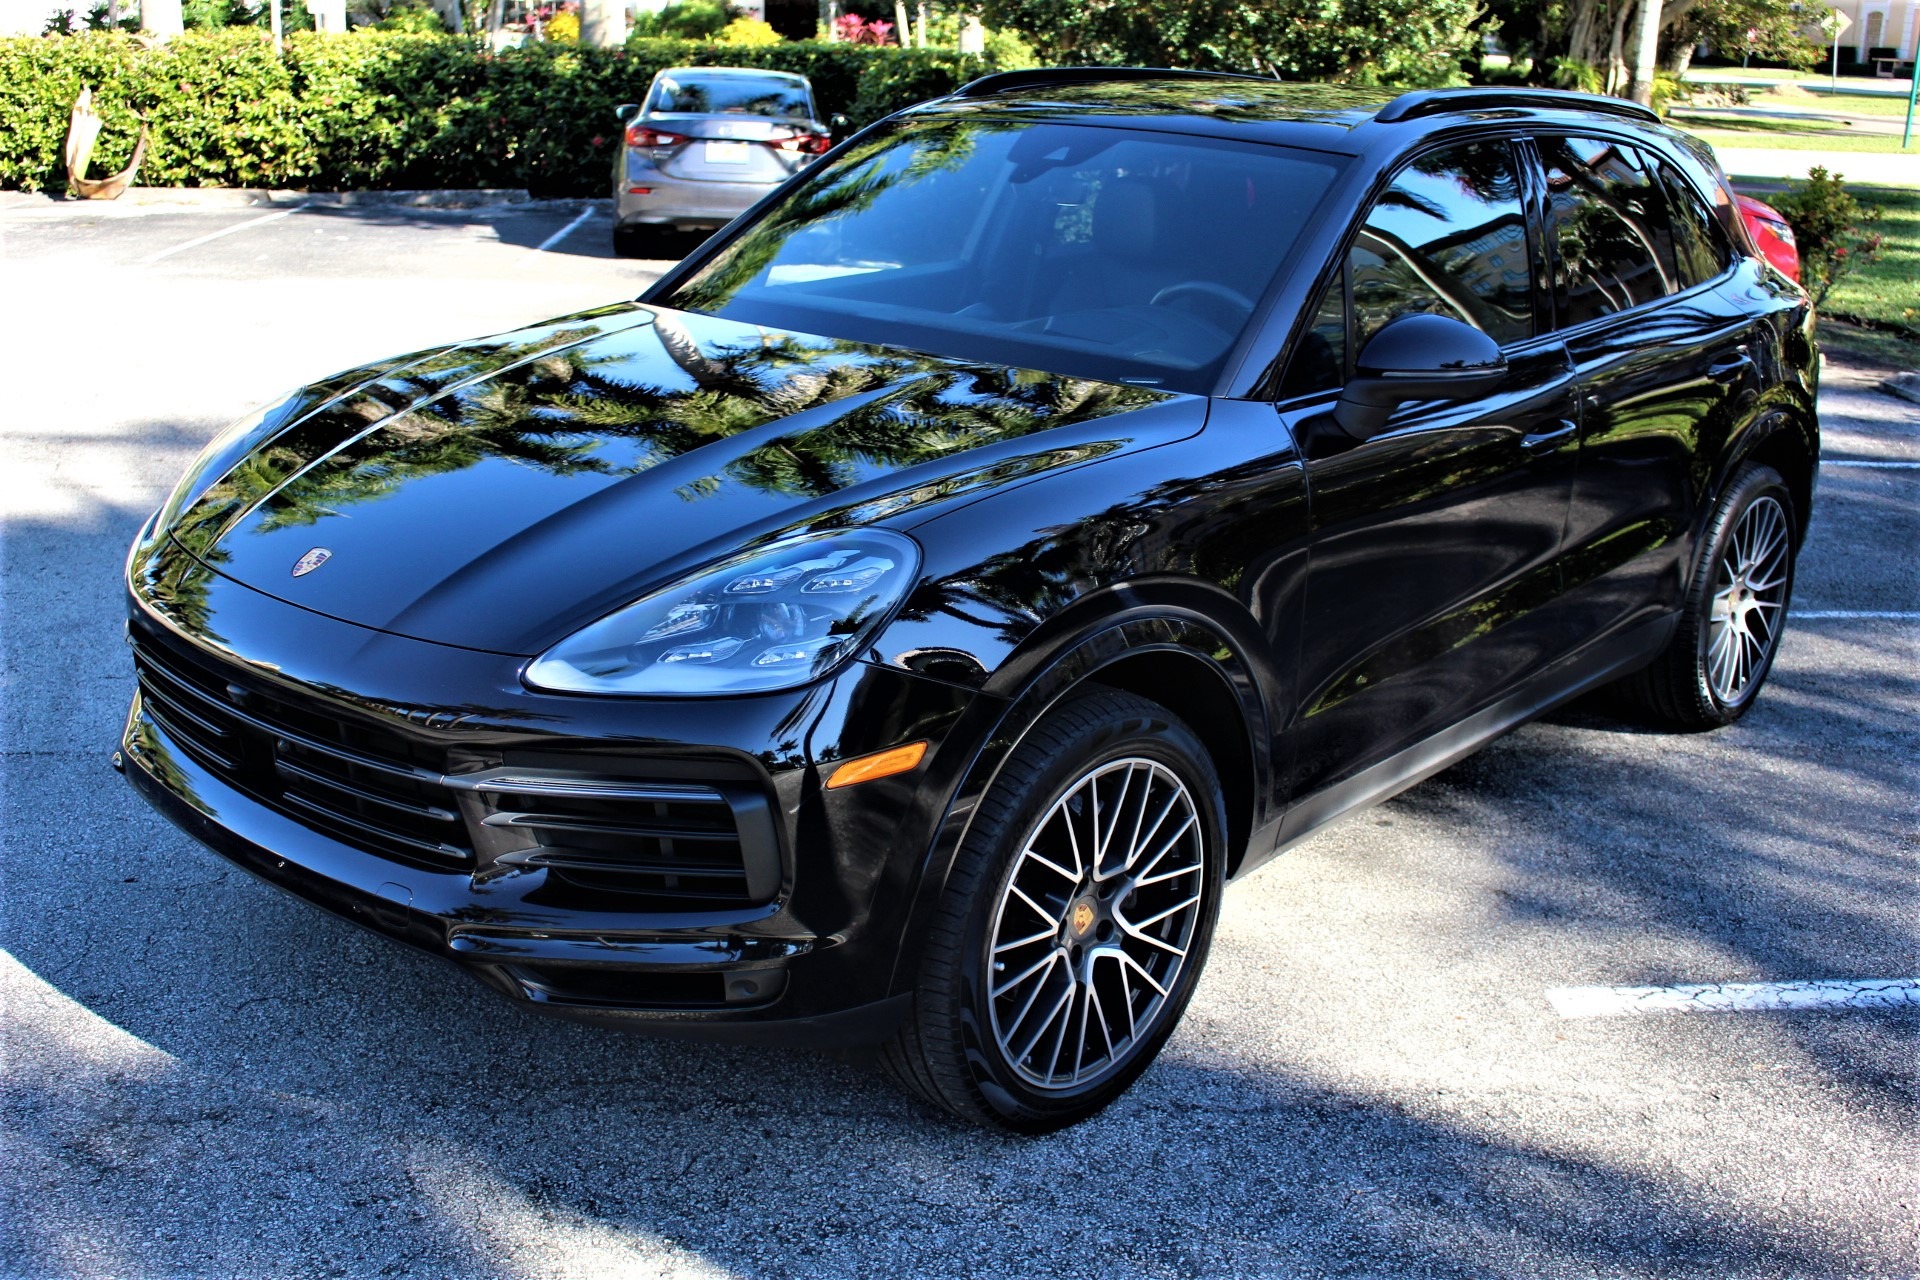 Used 2019 Porsche Cayenne for sale $72,850 at The Gables Sports Cars in Miami FL 33146 3